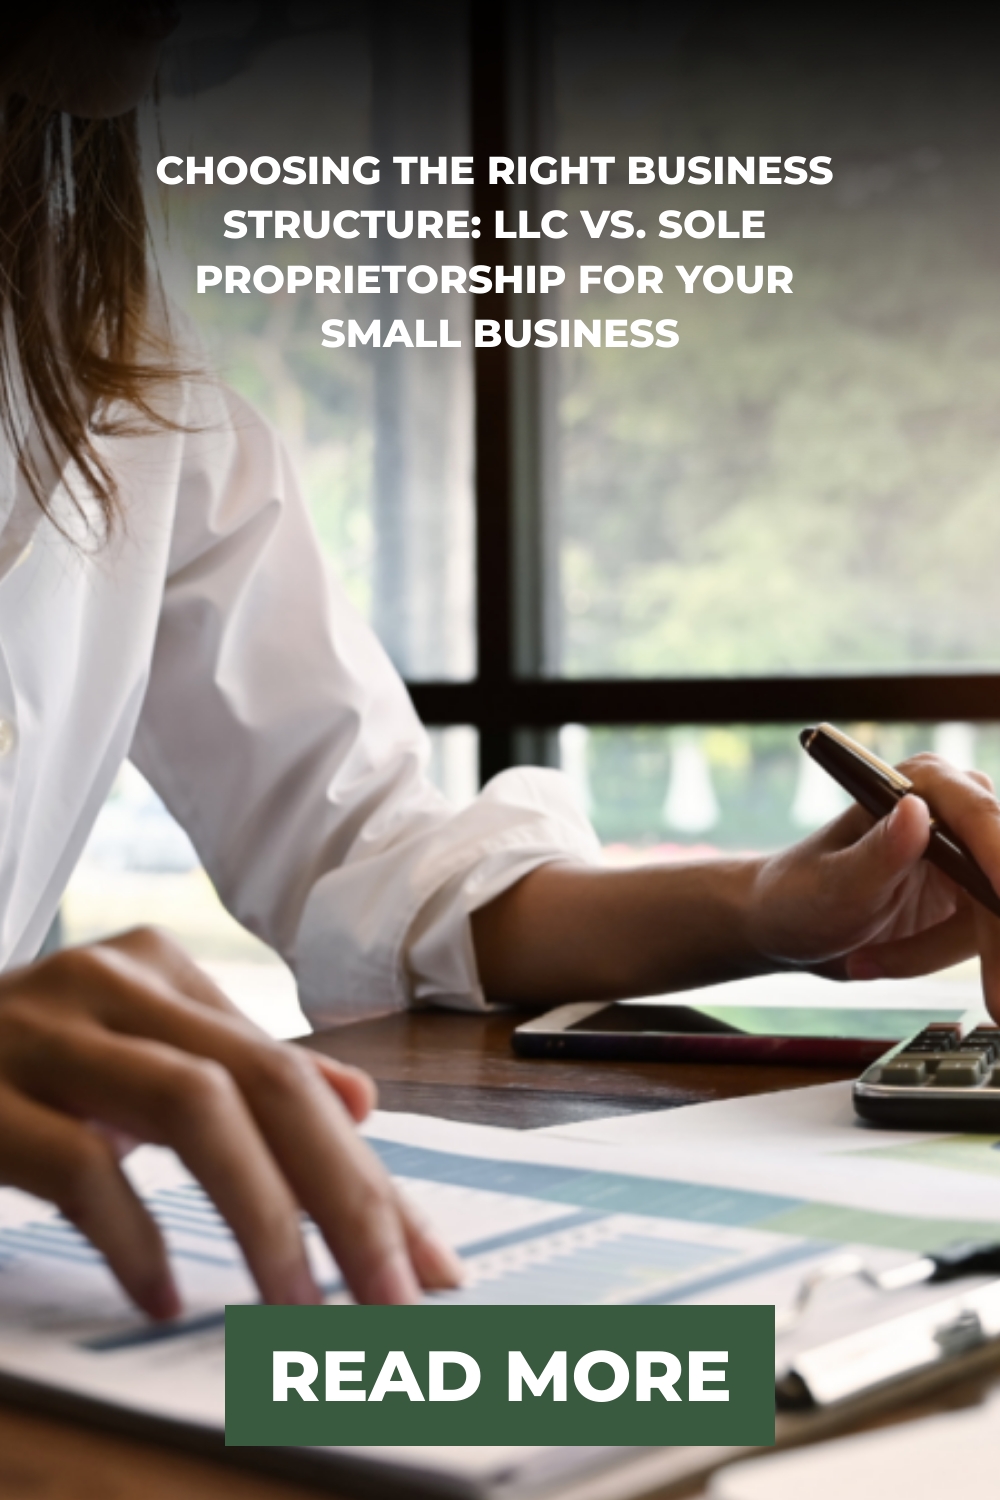 Choosing the Right Business Structure: LLC vs. Sole Proprietorship for Your Small Business